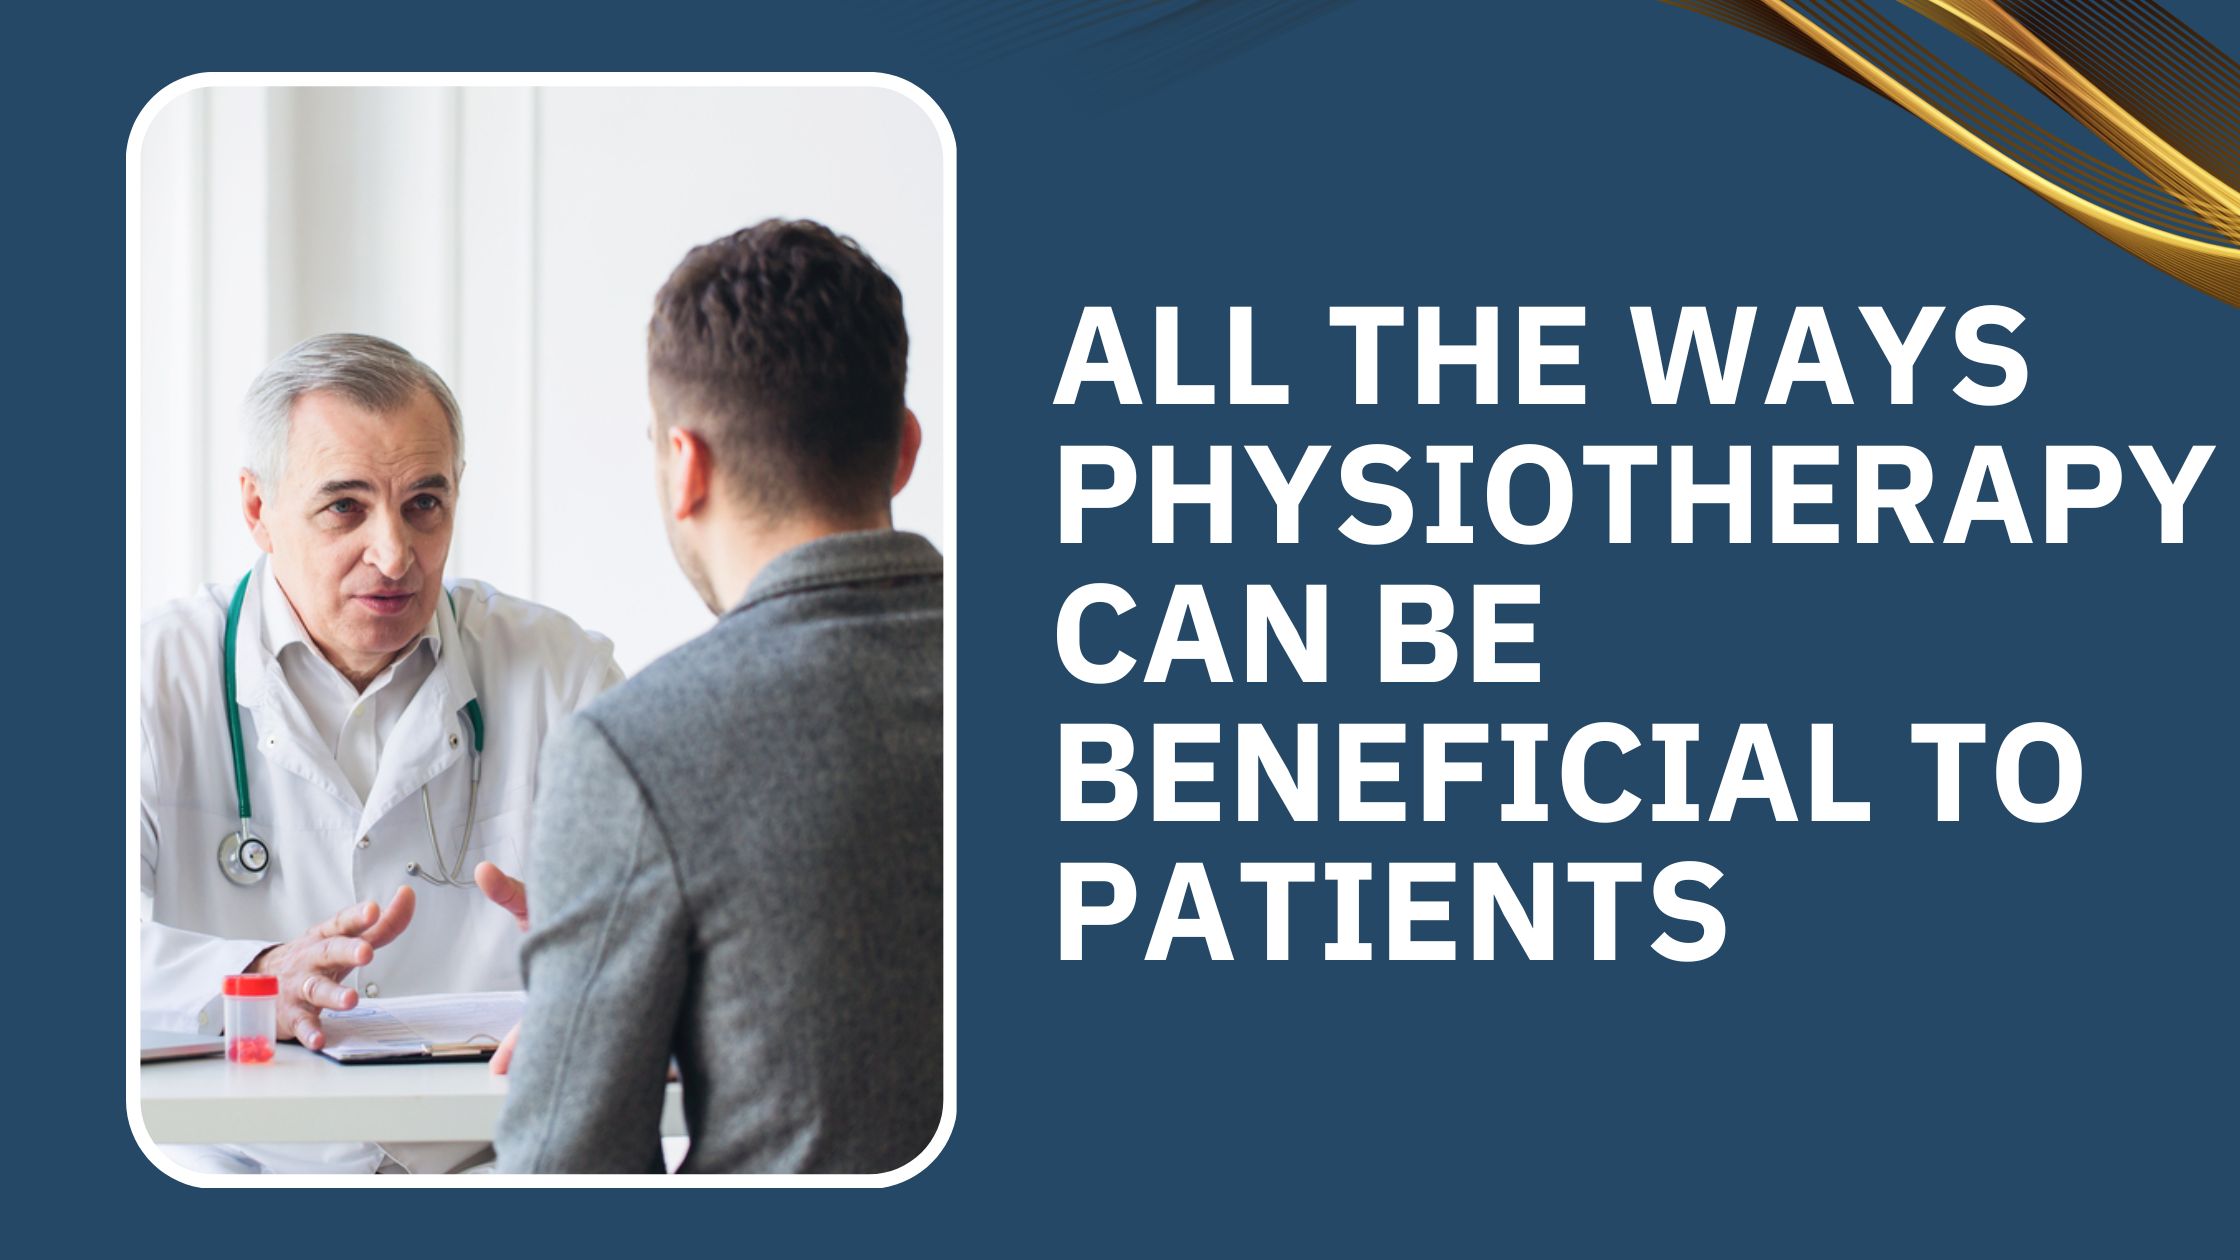 All the ways physiotherapy can be beneficial to patients